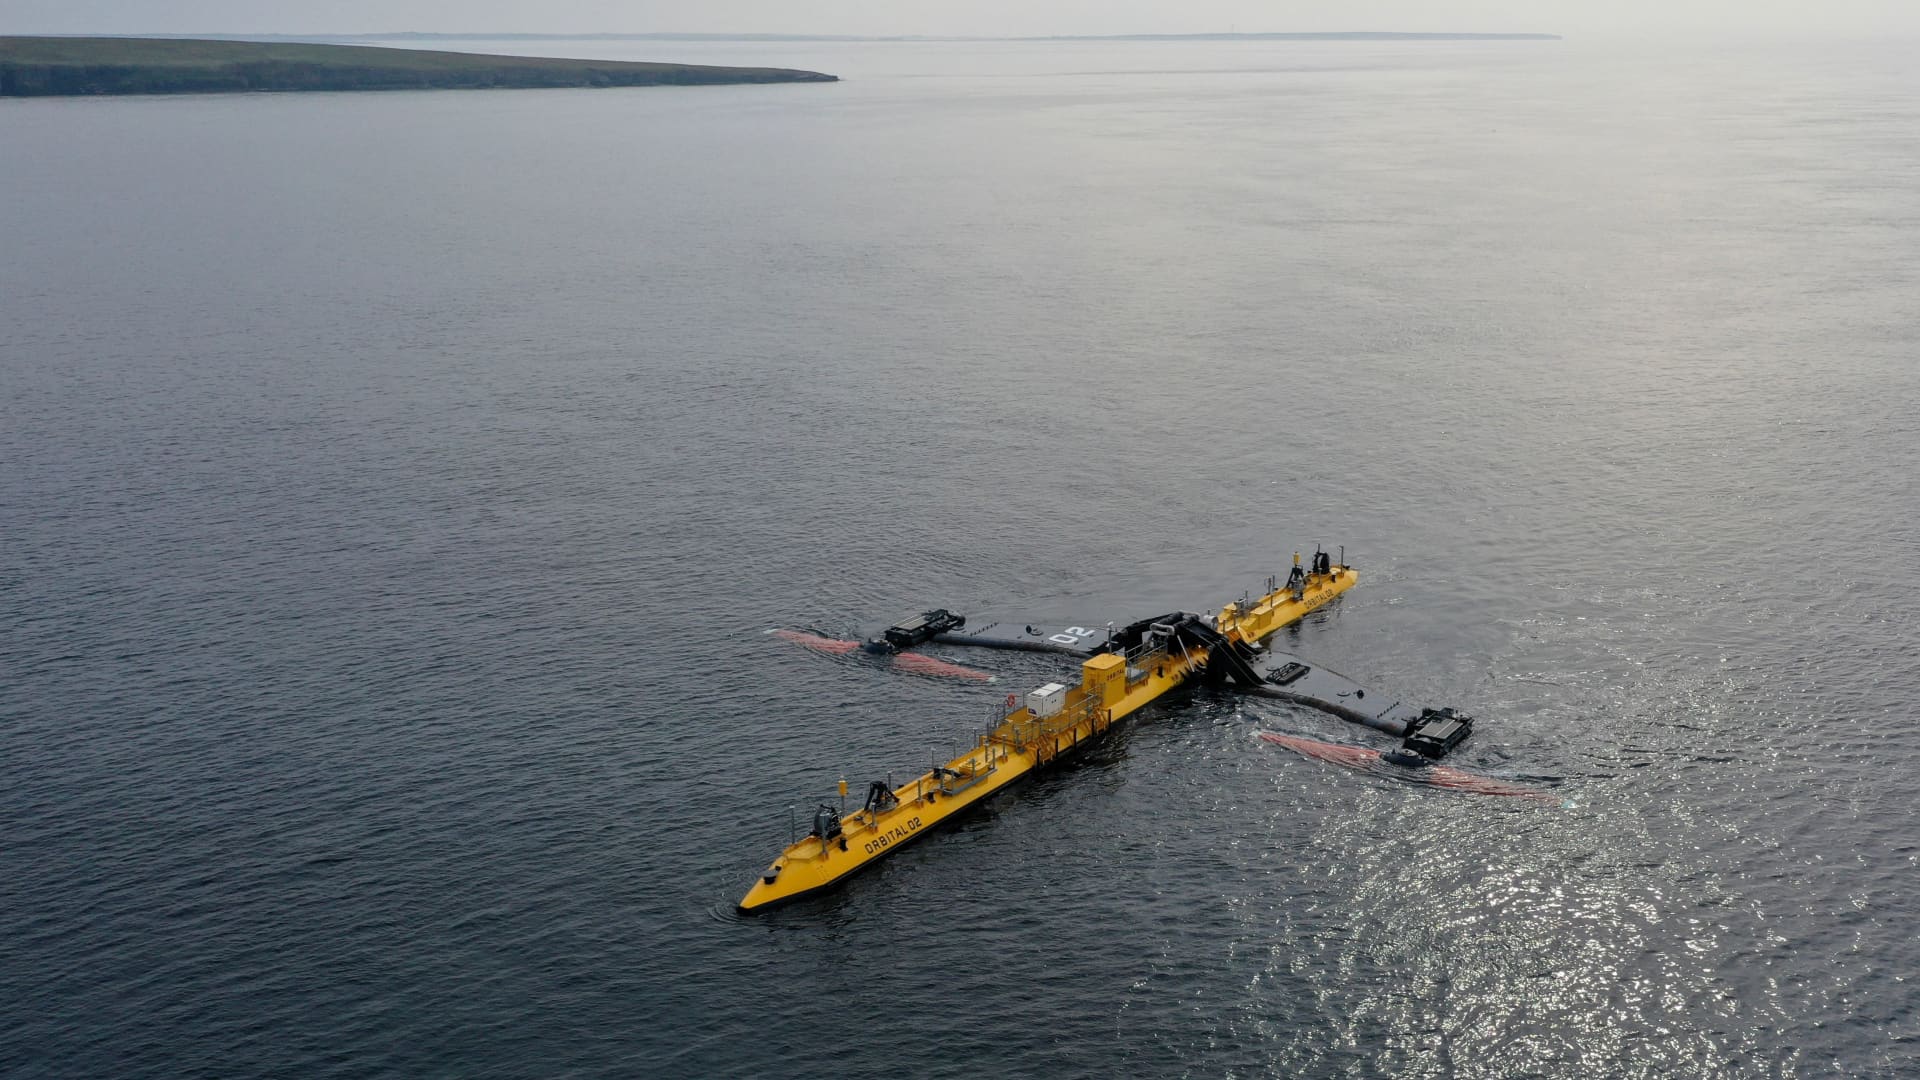 The world’s most powerful tidal turbine just got a major funding boost